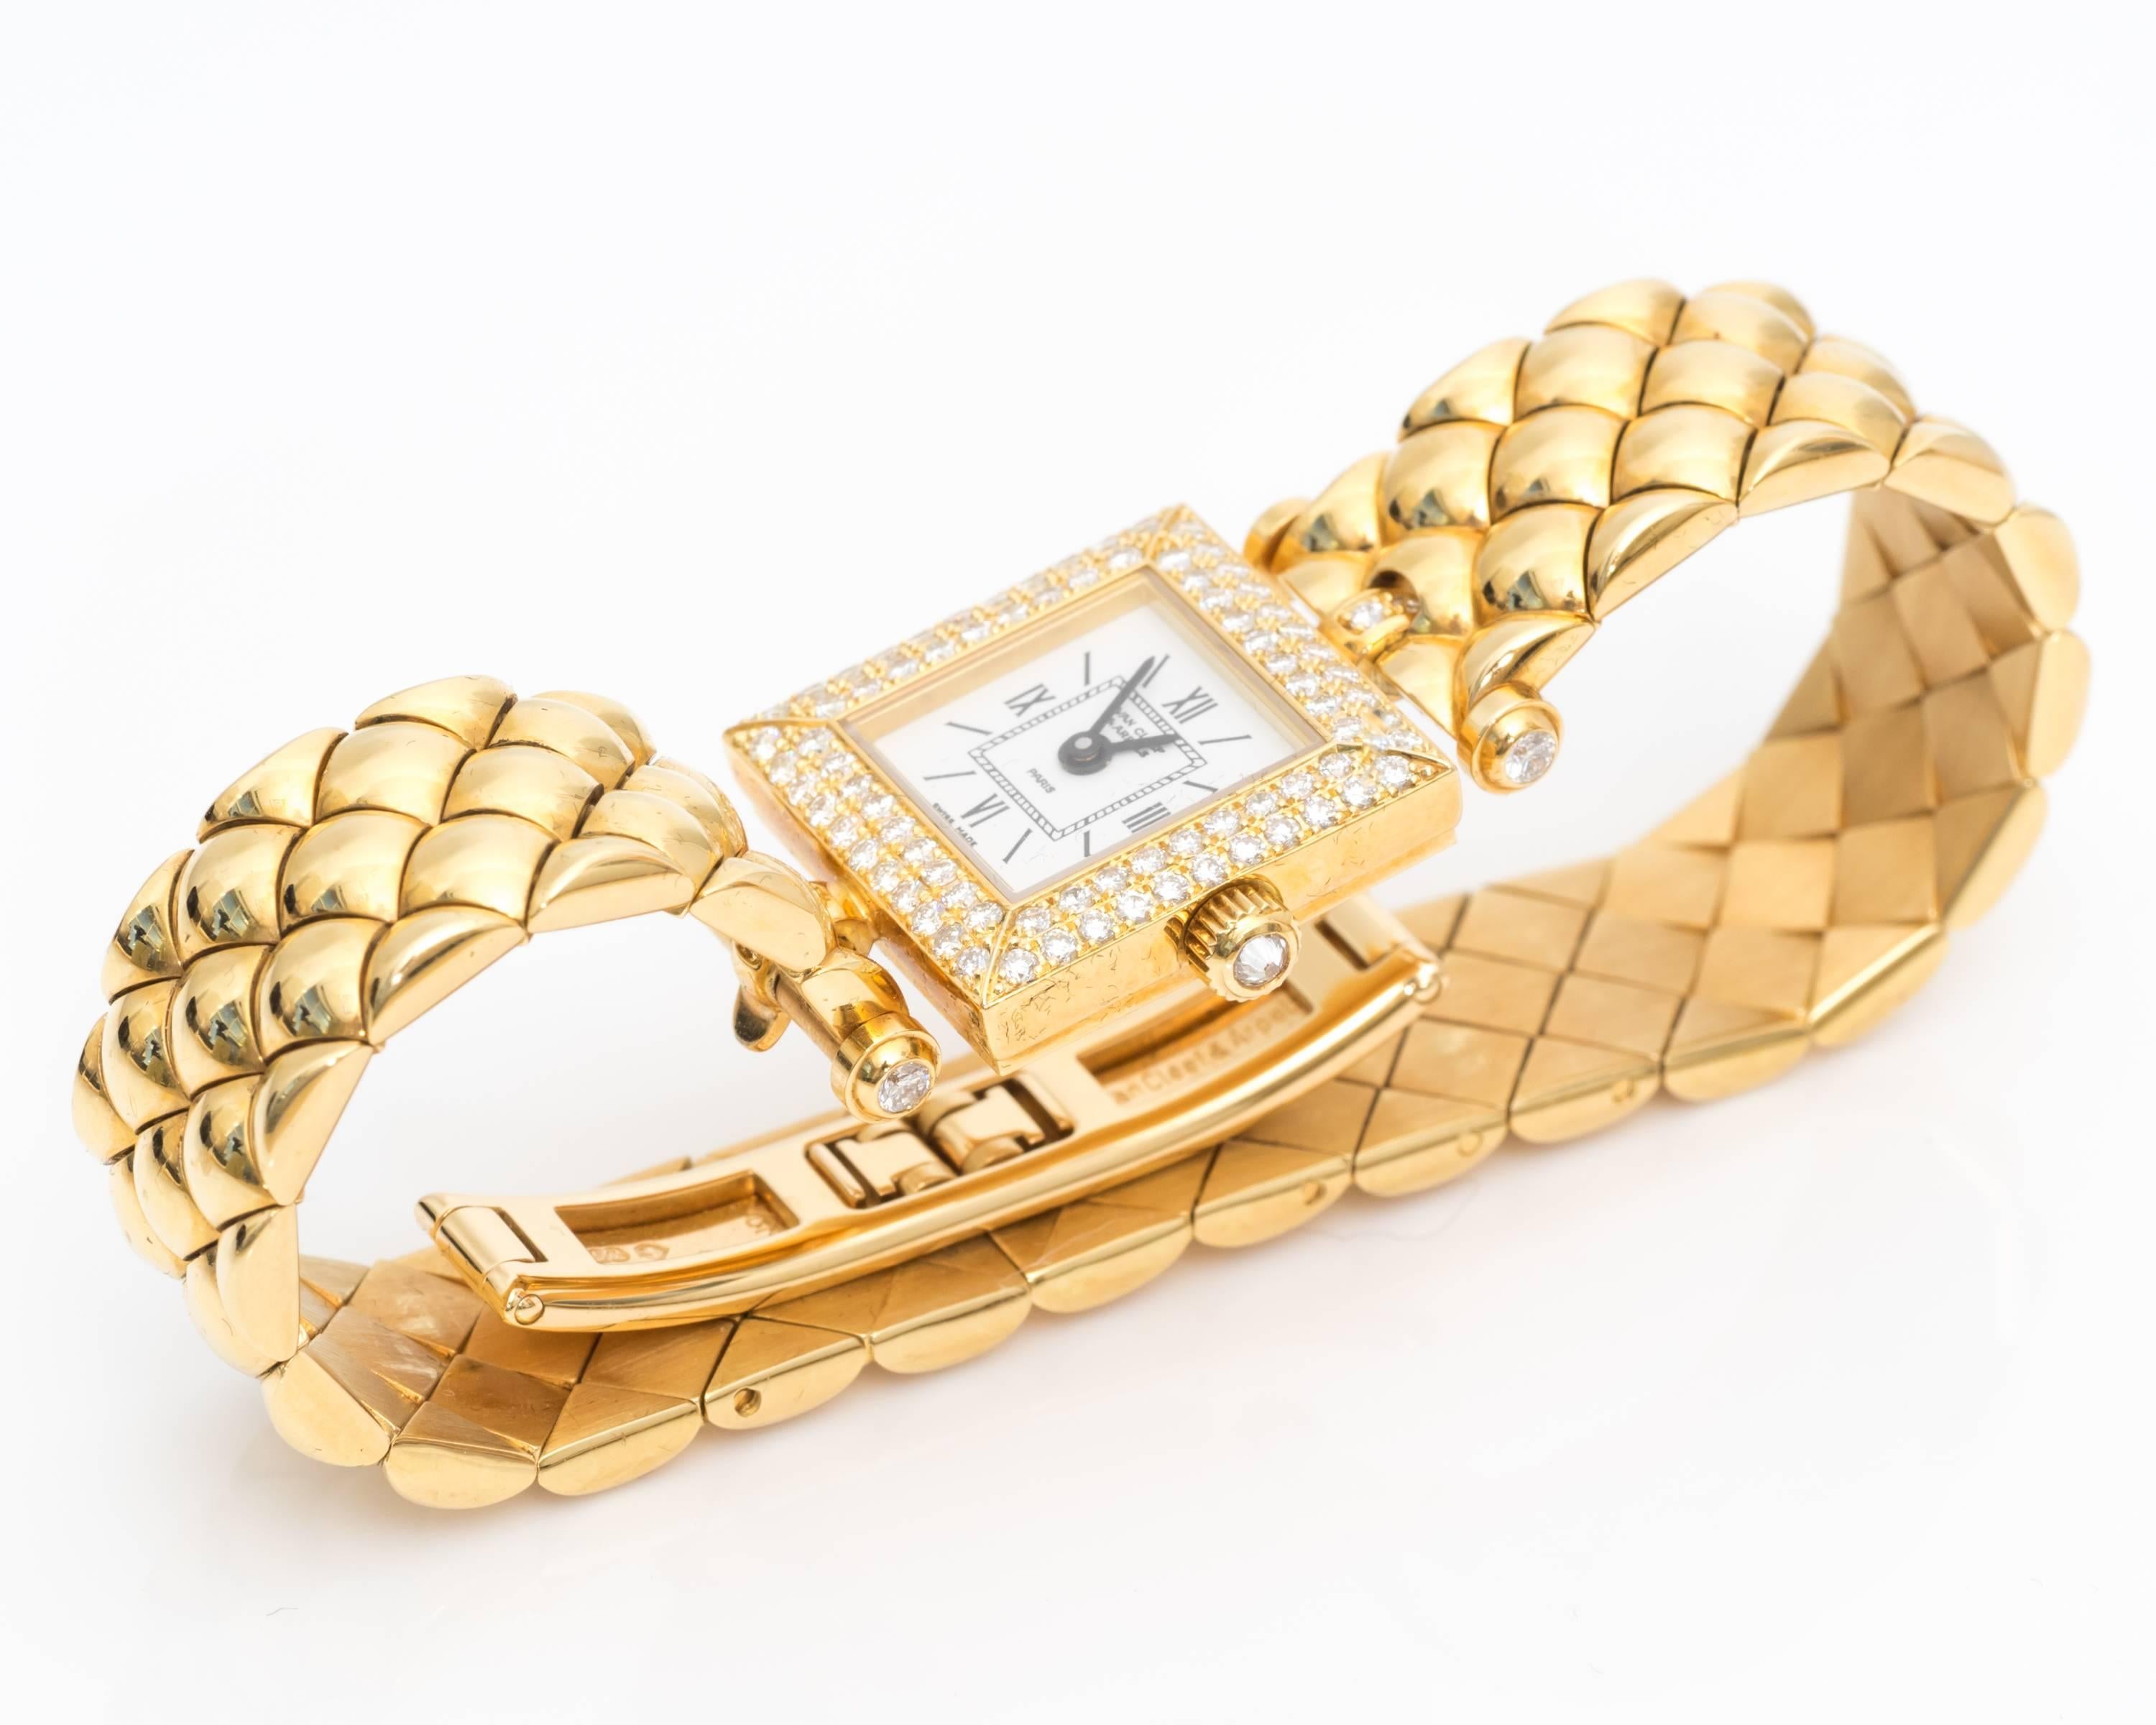 Beautiful Van Cleef & Arpels watch, unique and rare combination.
Watch features White Enamel Dial embellished with a diamond bezel
18K Yellow Gold Bracelet with double deployment clasp
Swiss Quartz movement.

Measurements include:
20mm x 20mm case